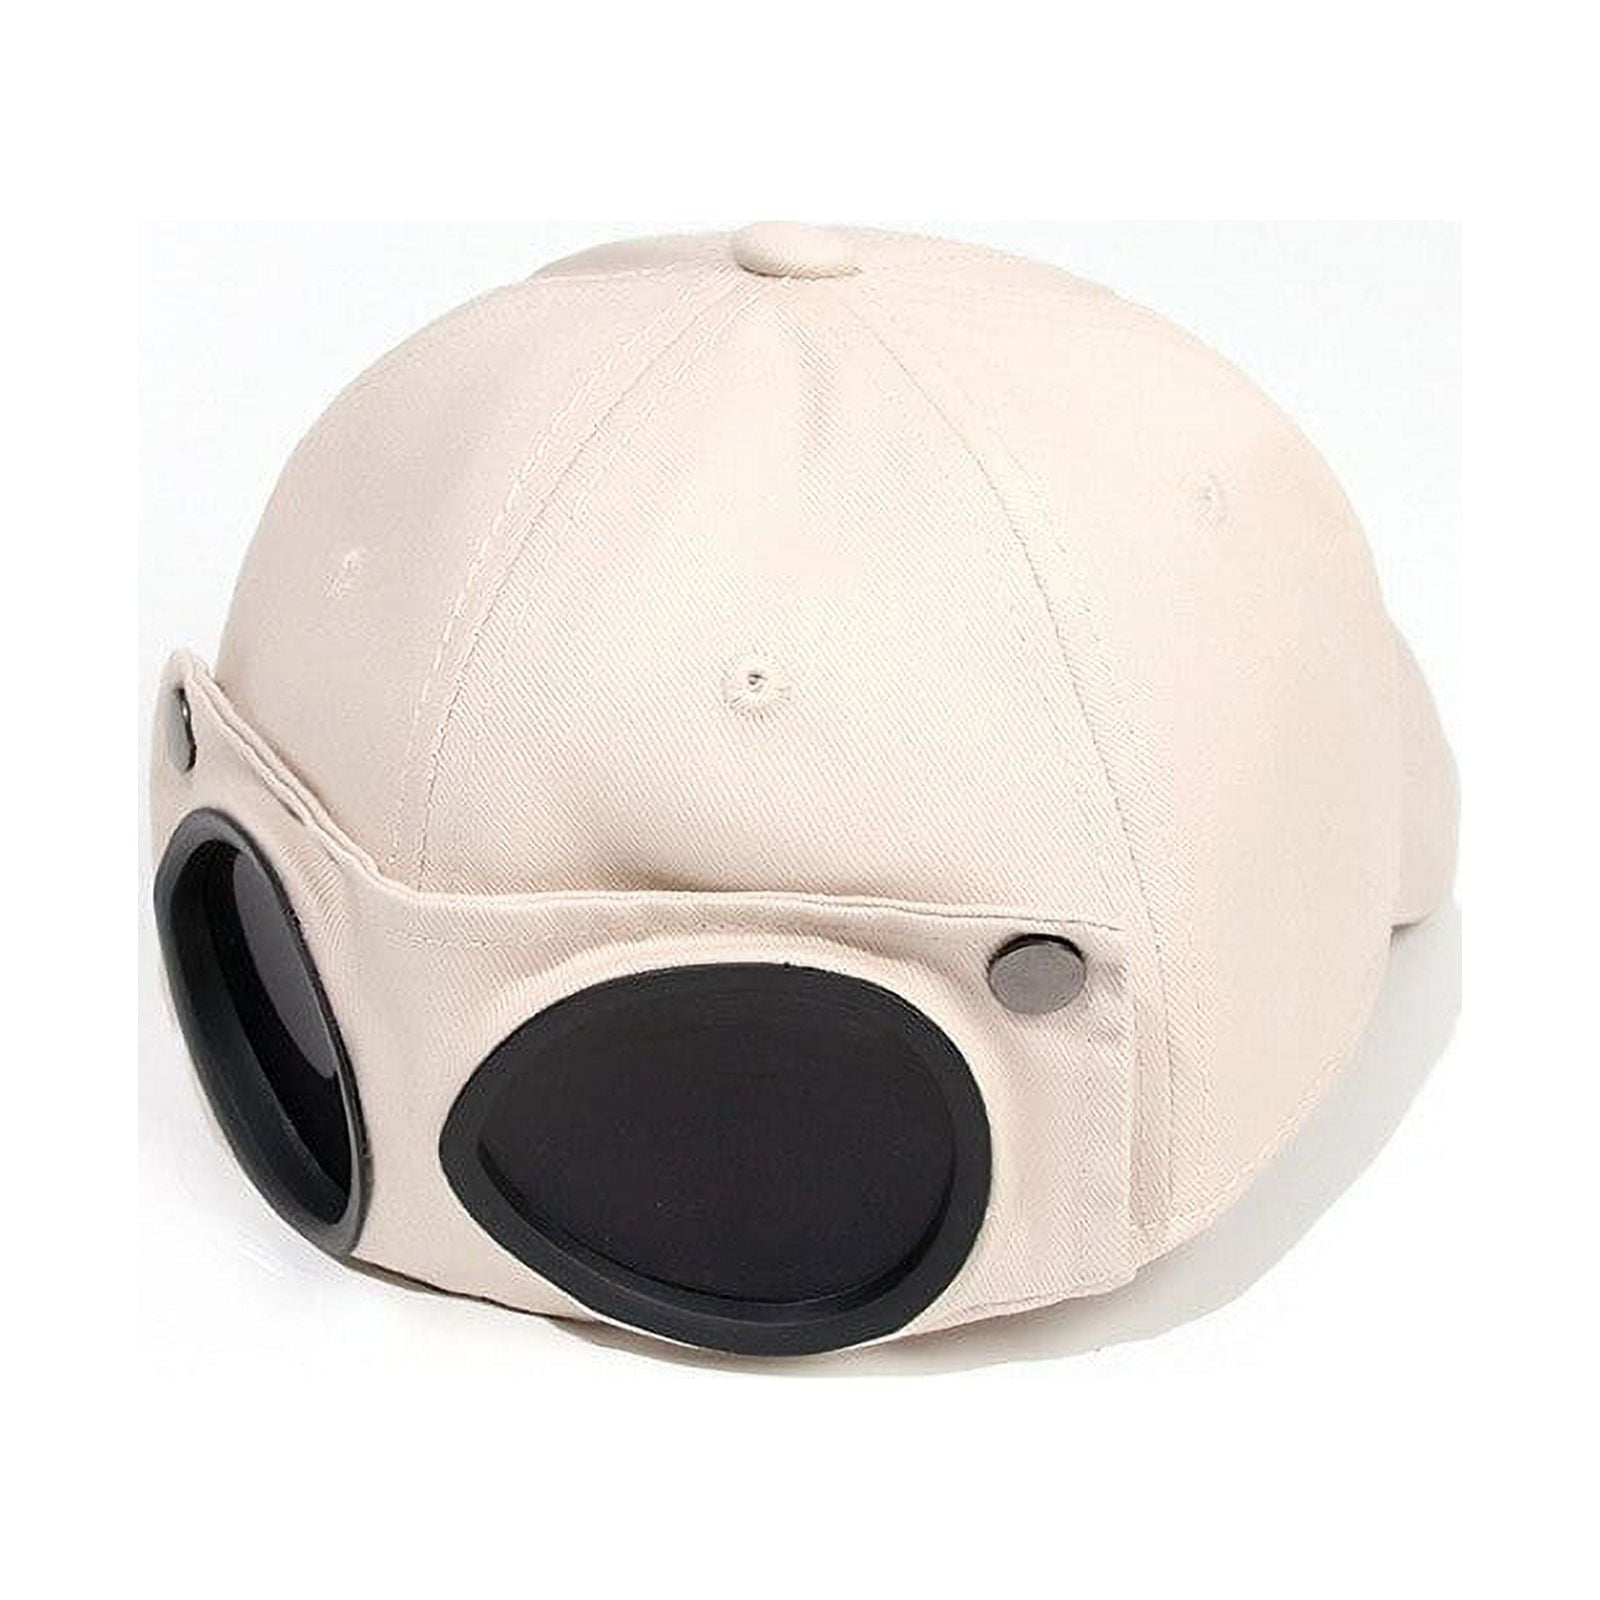  Baseball Cap Fashion Papi Embroidered Adjustable Men Women  （color2） : Clothing, Shoes & Jewelry